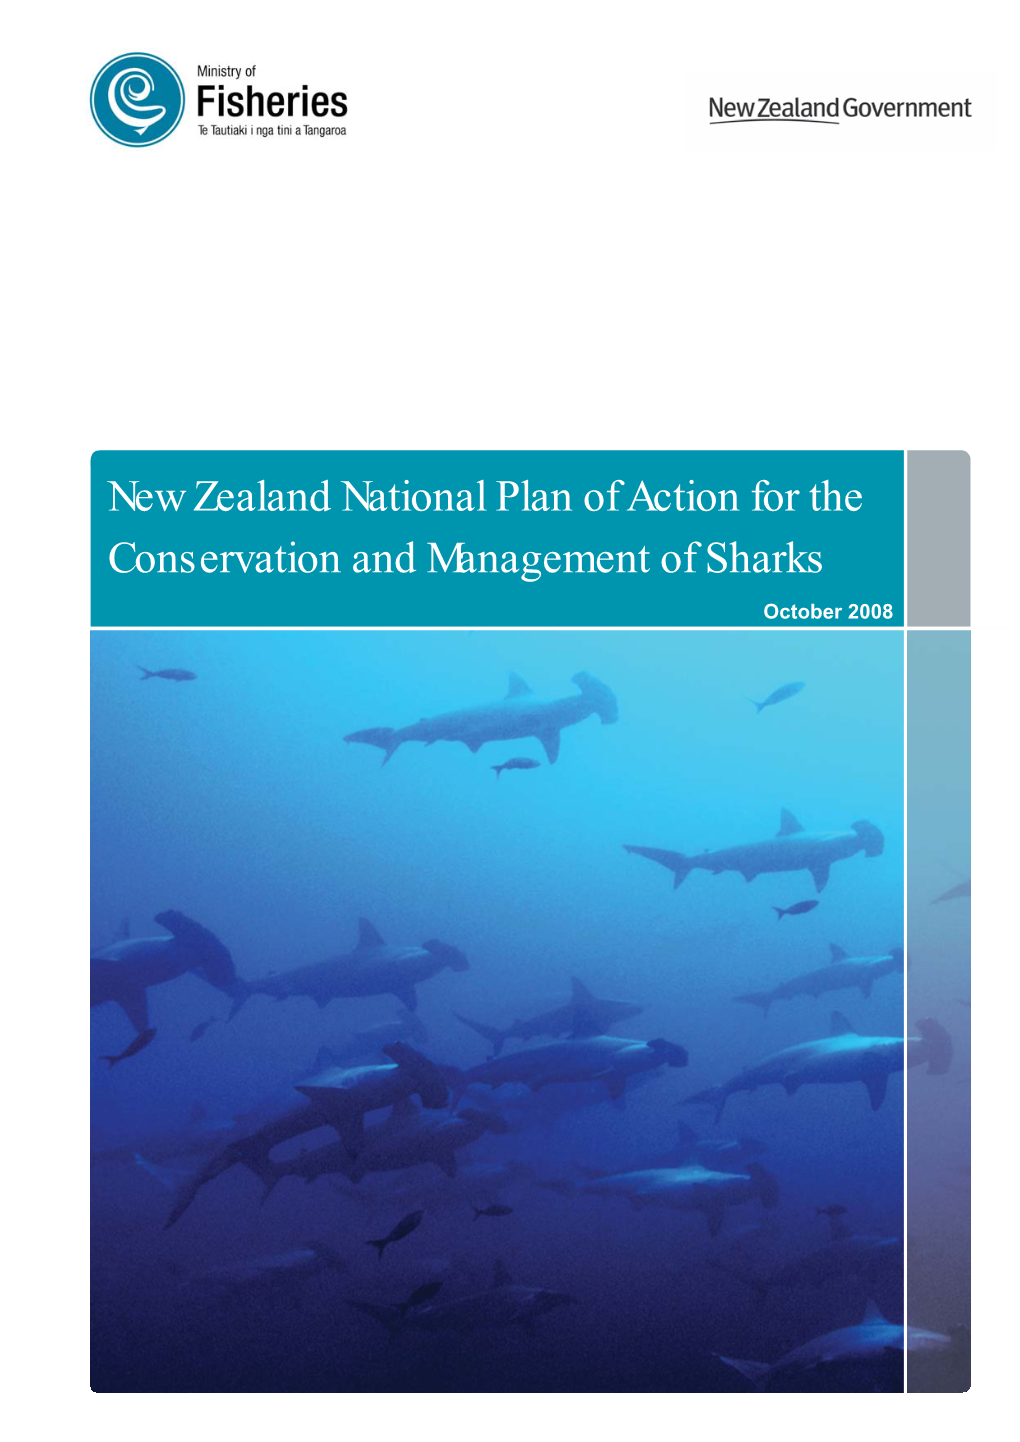 Draft National Plan of Action for the Conservation And